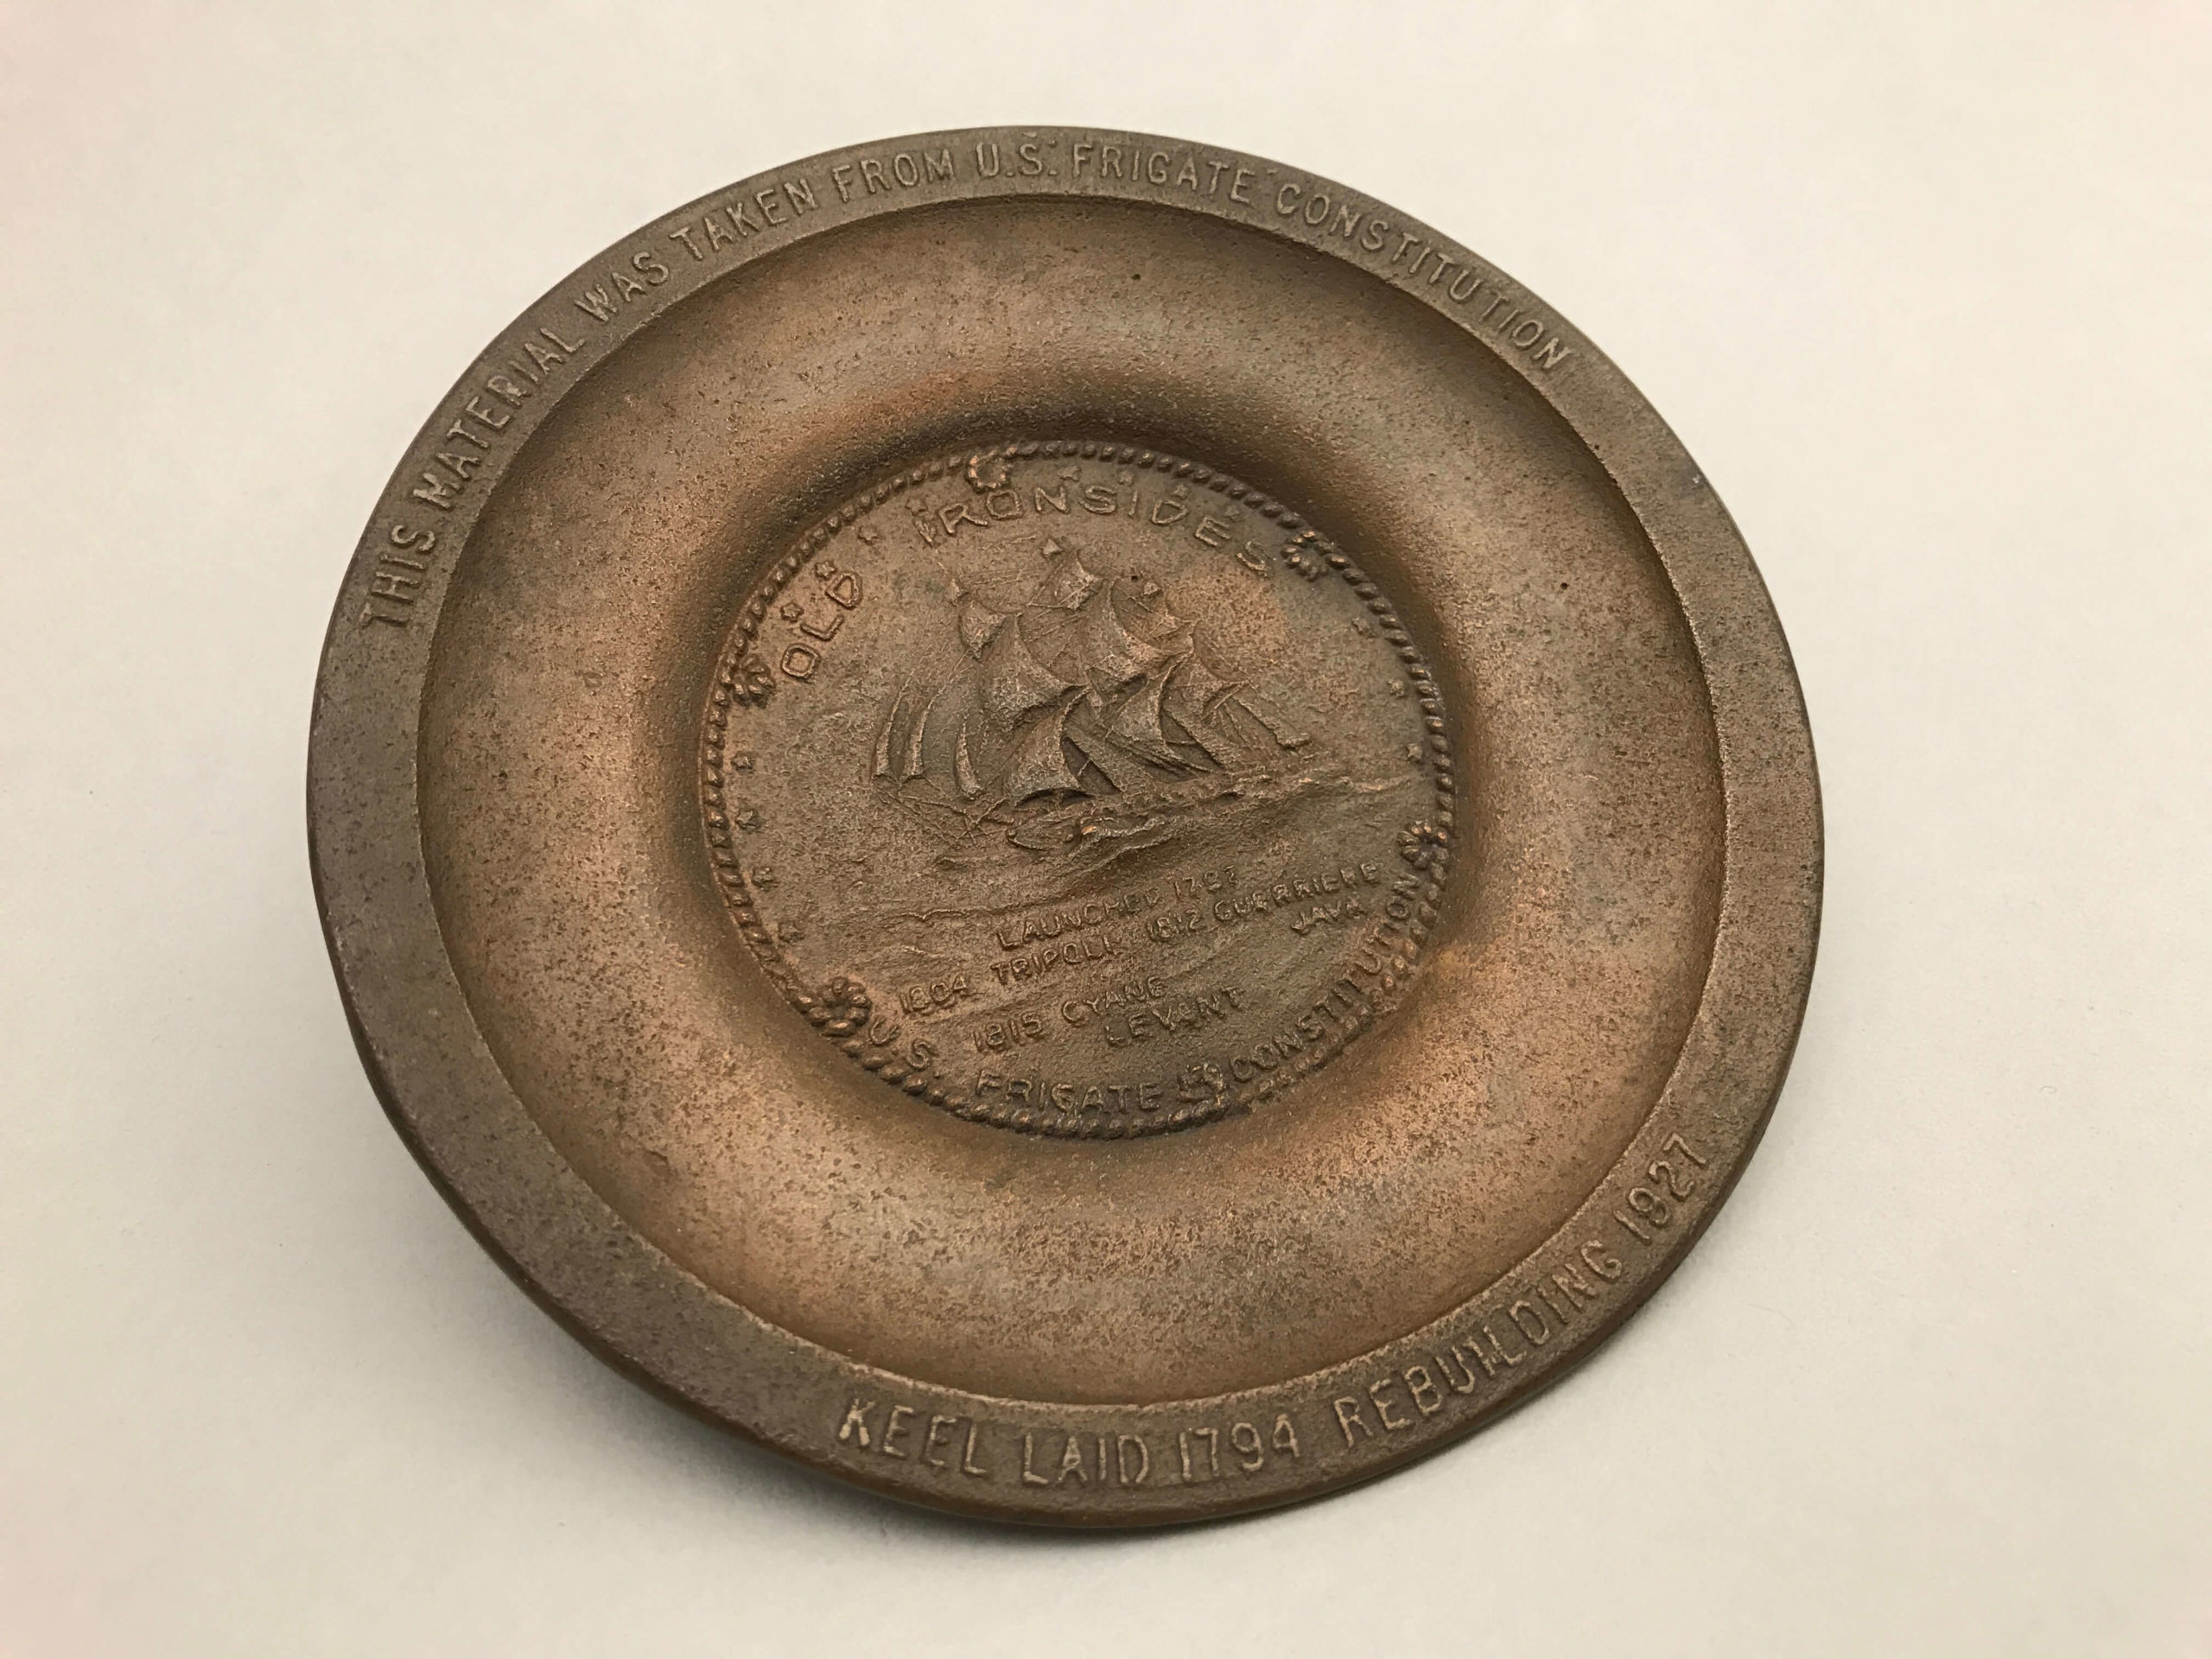 Souvenir pin tray made of material removed from USS Constitution during the 1927-1931 restoration. [Commodores Fund Purchase]